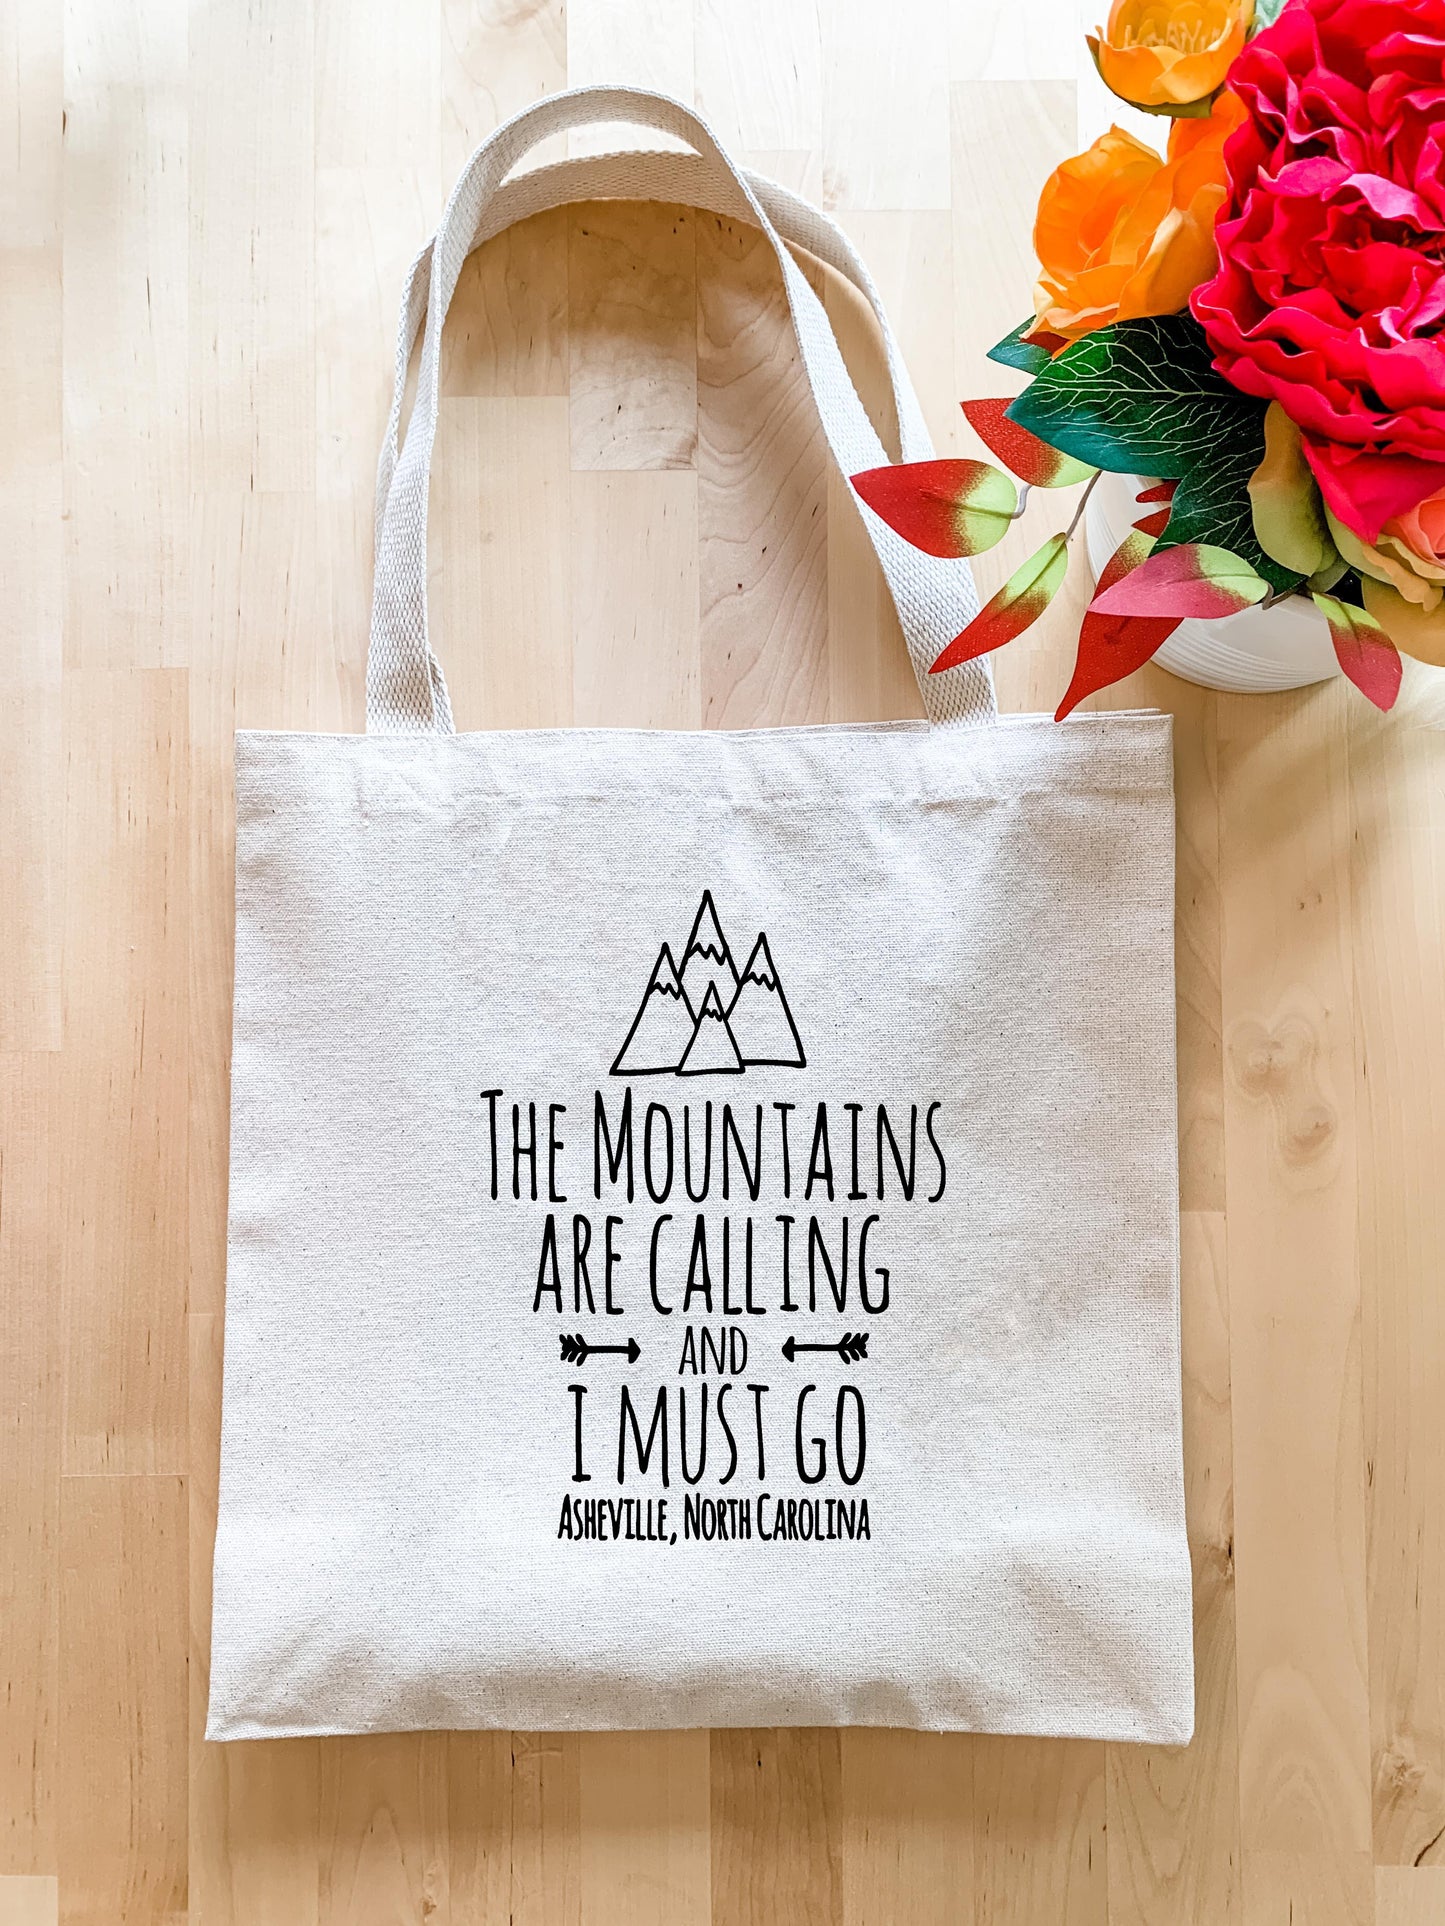 The Mountains are Calling and I Must Go, Asheville NC - Tote Bag - MoonlightMakers